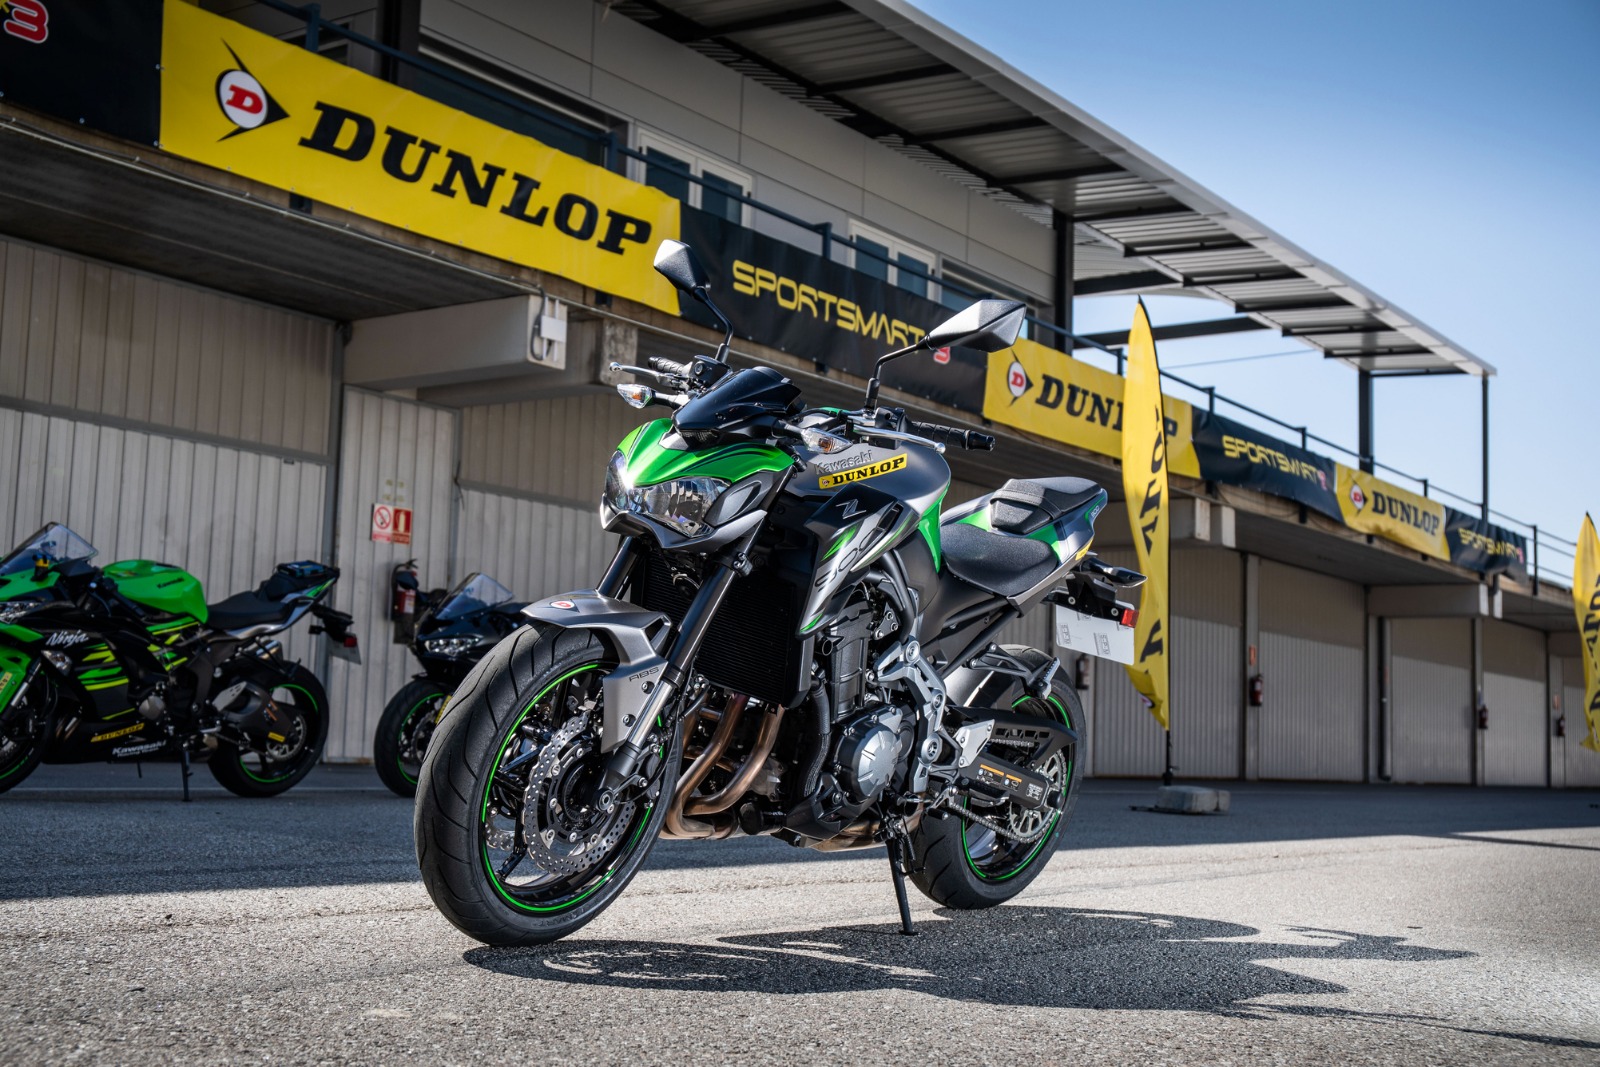 Dunlop Motorcycle Event / Product Launch